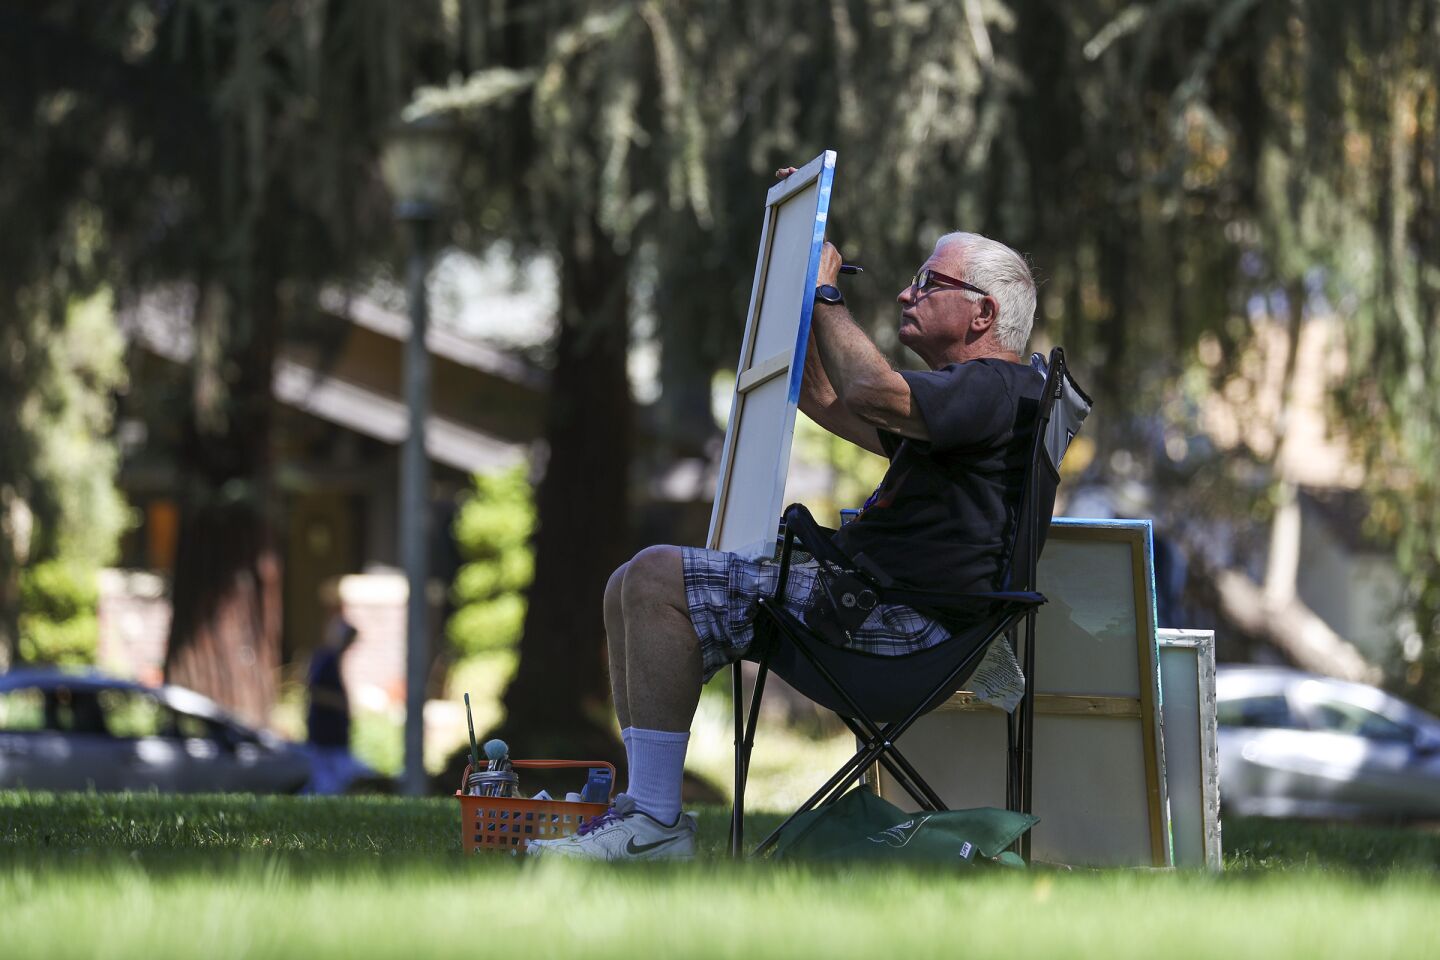 On a hot and sunny Tuesday, John Call finds shade under a tree to paint at Kuns Park in La Verne.